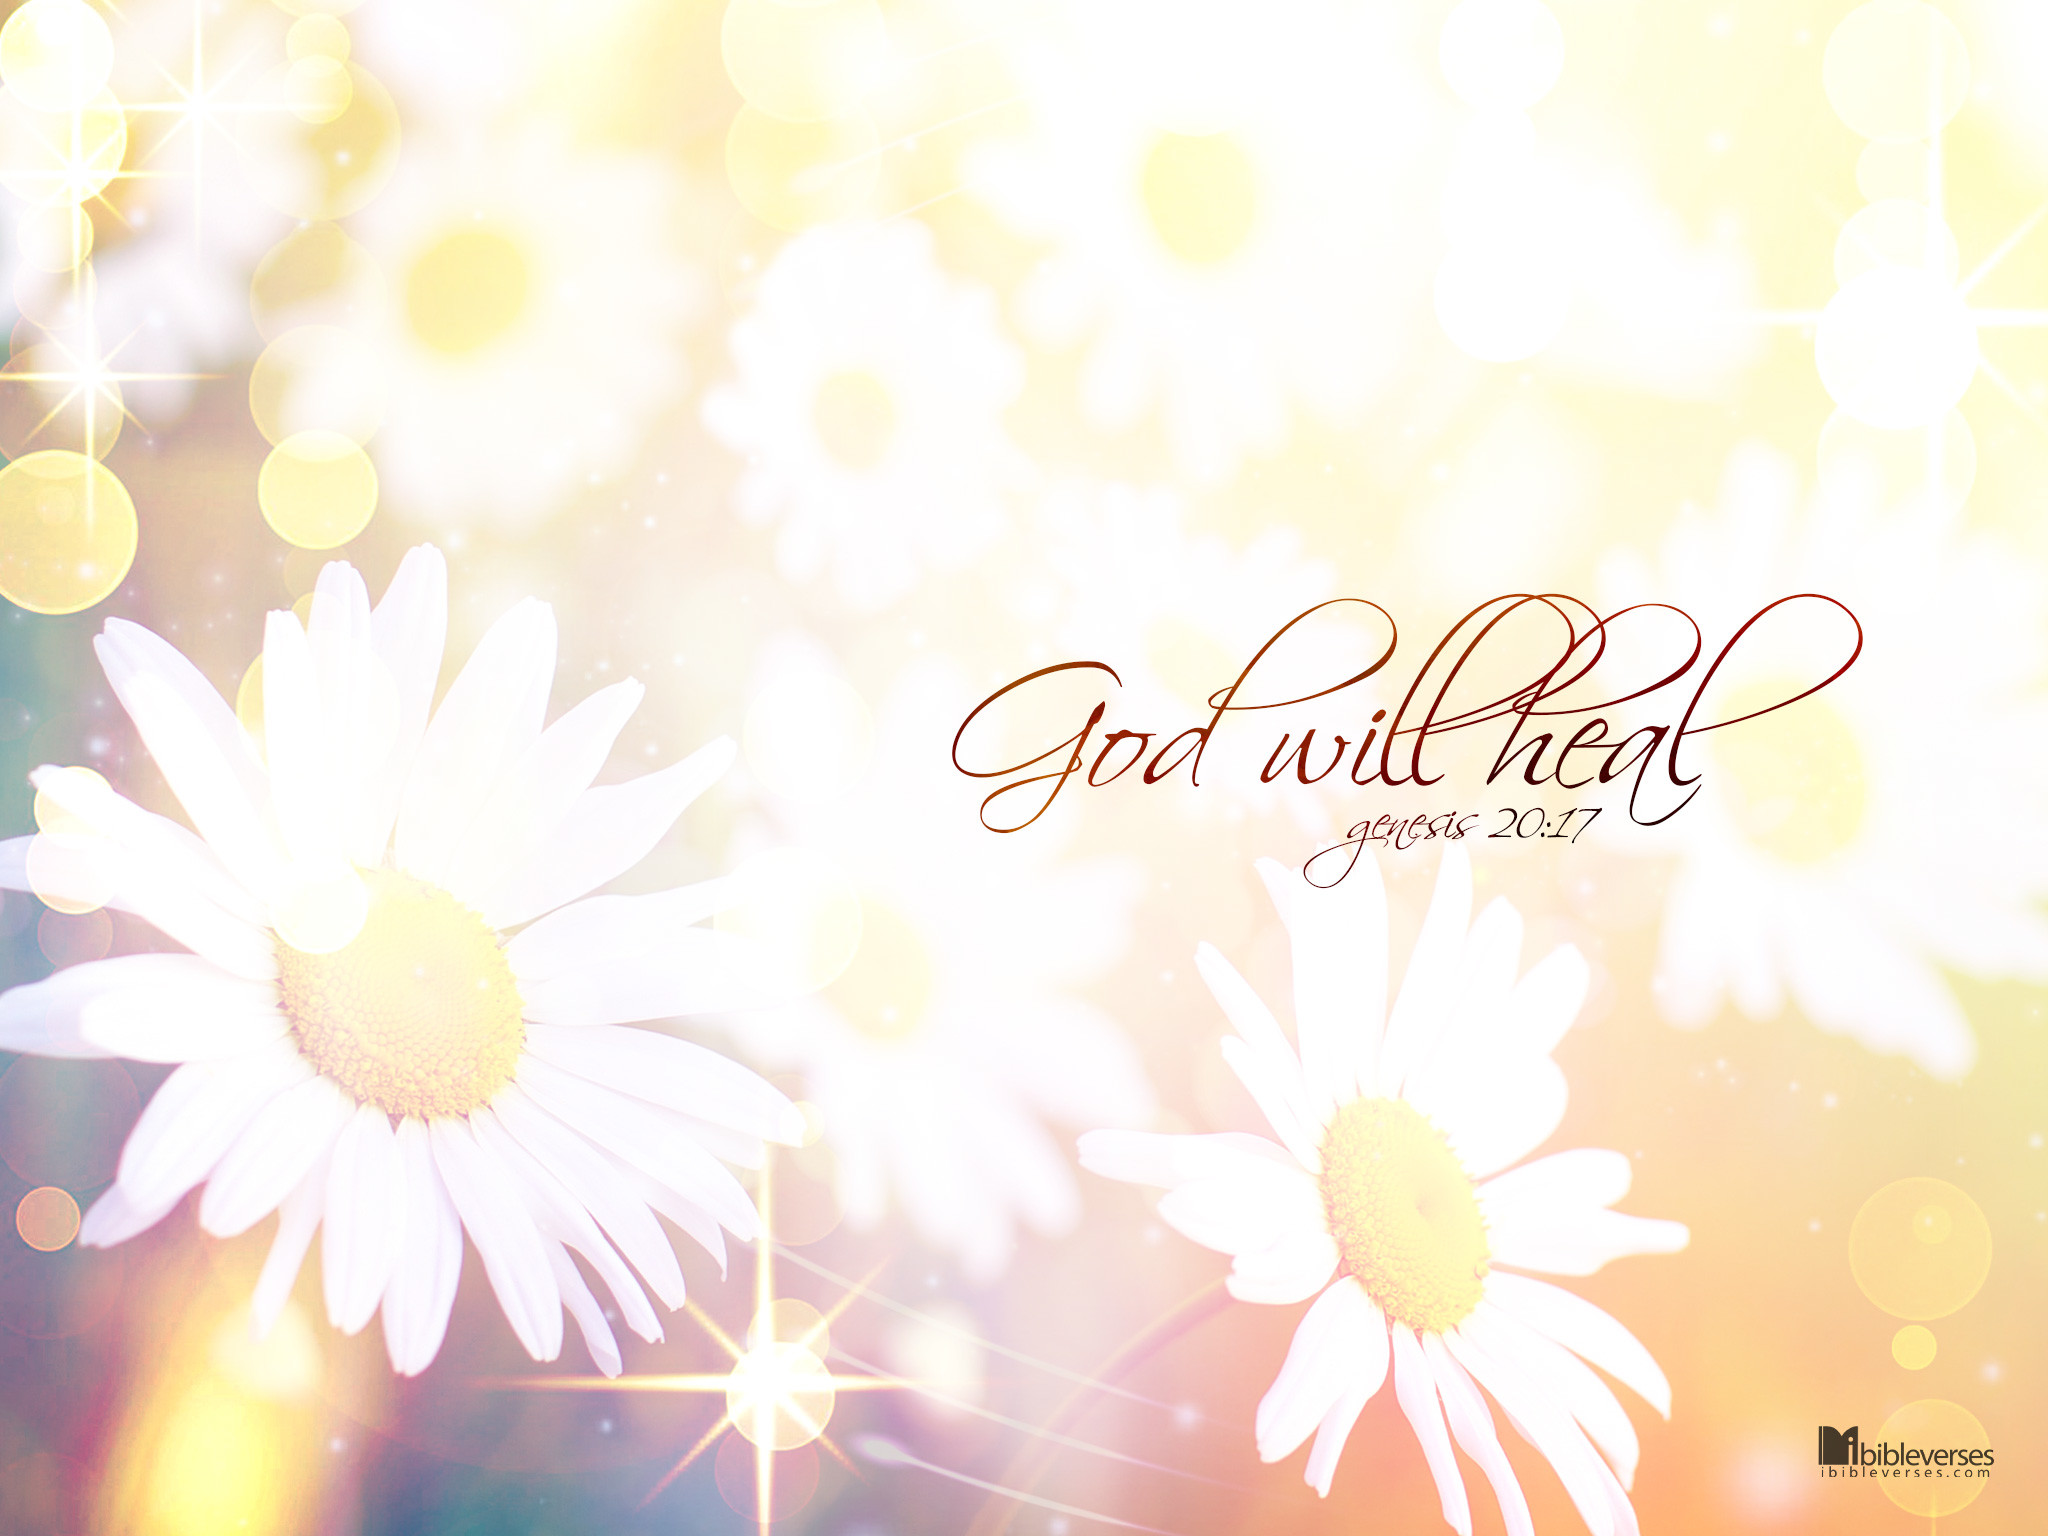 2048x1536 By ibibleverses On April 22, 2014